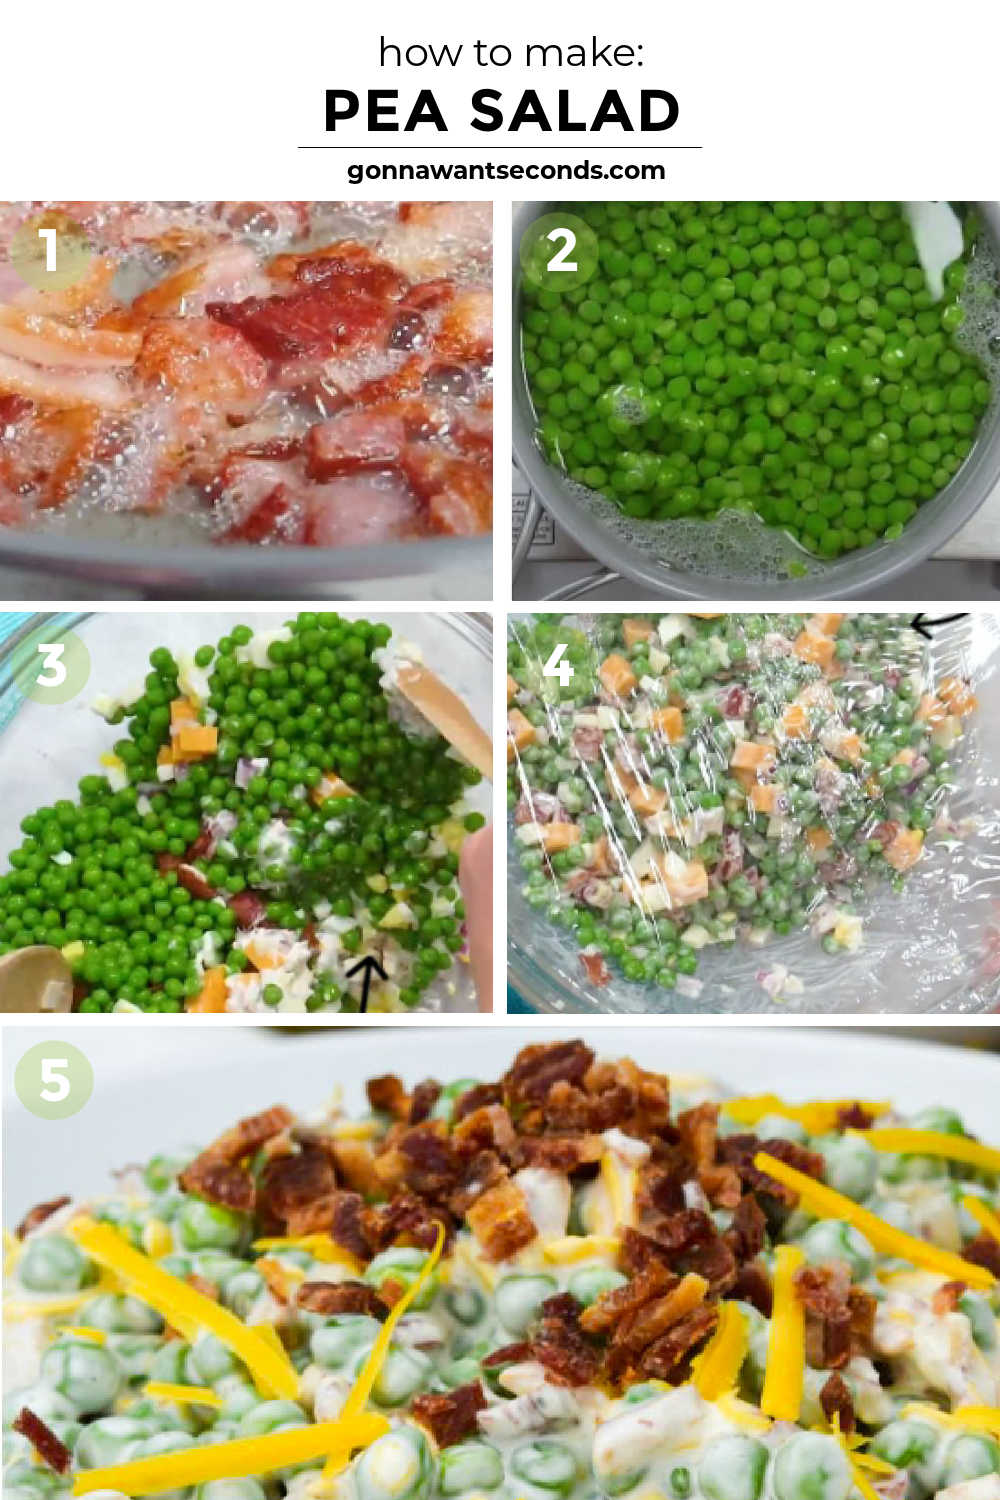 Step by step how to make pea salad